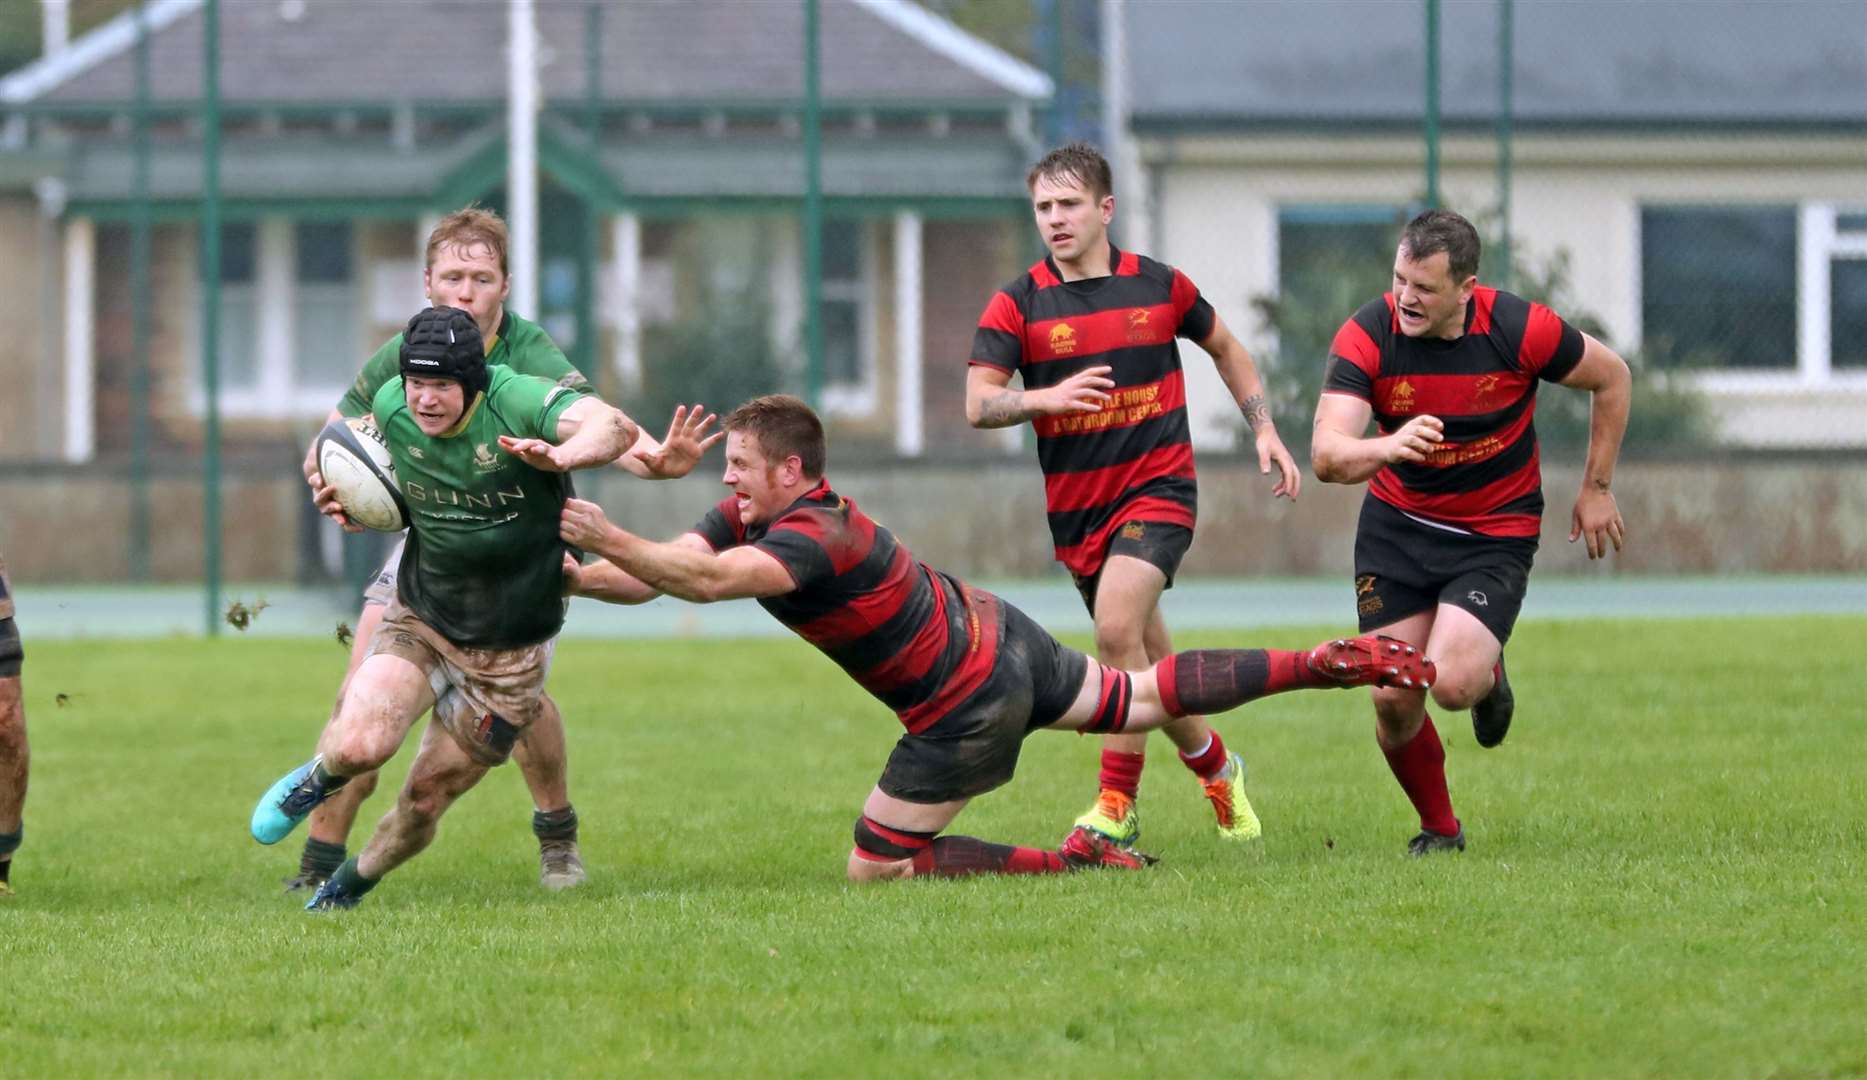 Kris Hamilton, pictured on his way to scoring a try in the recent win against Grangemouth, is struggling to recover from a hamstring injury. Picture: James Gunn